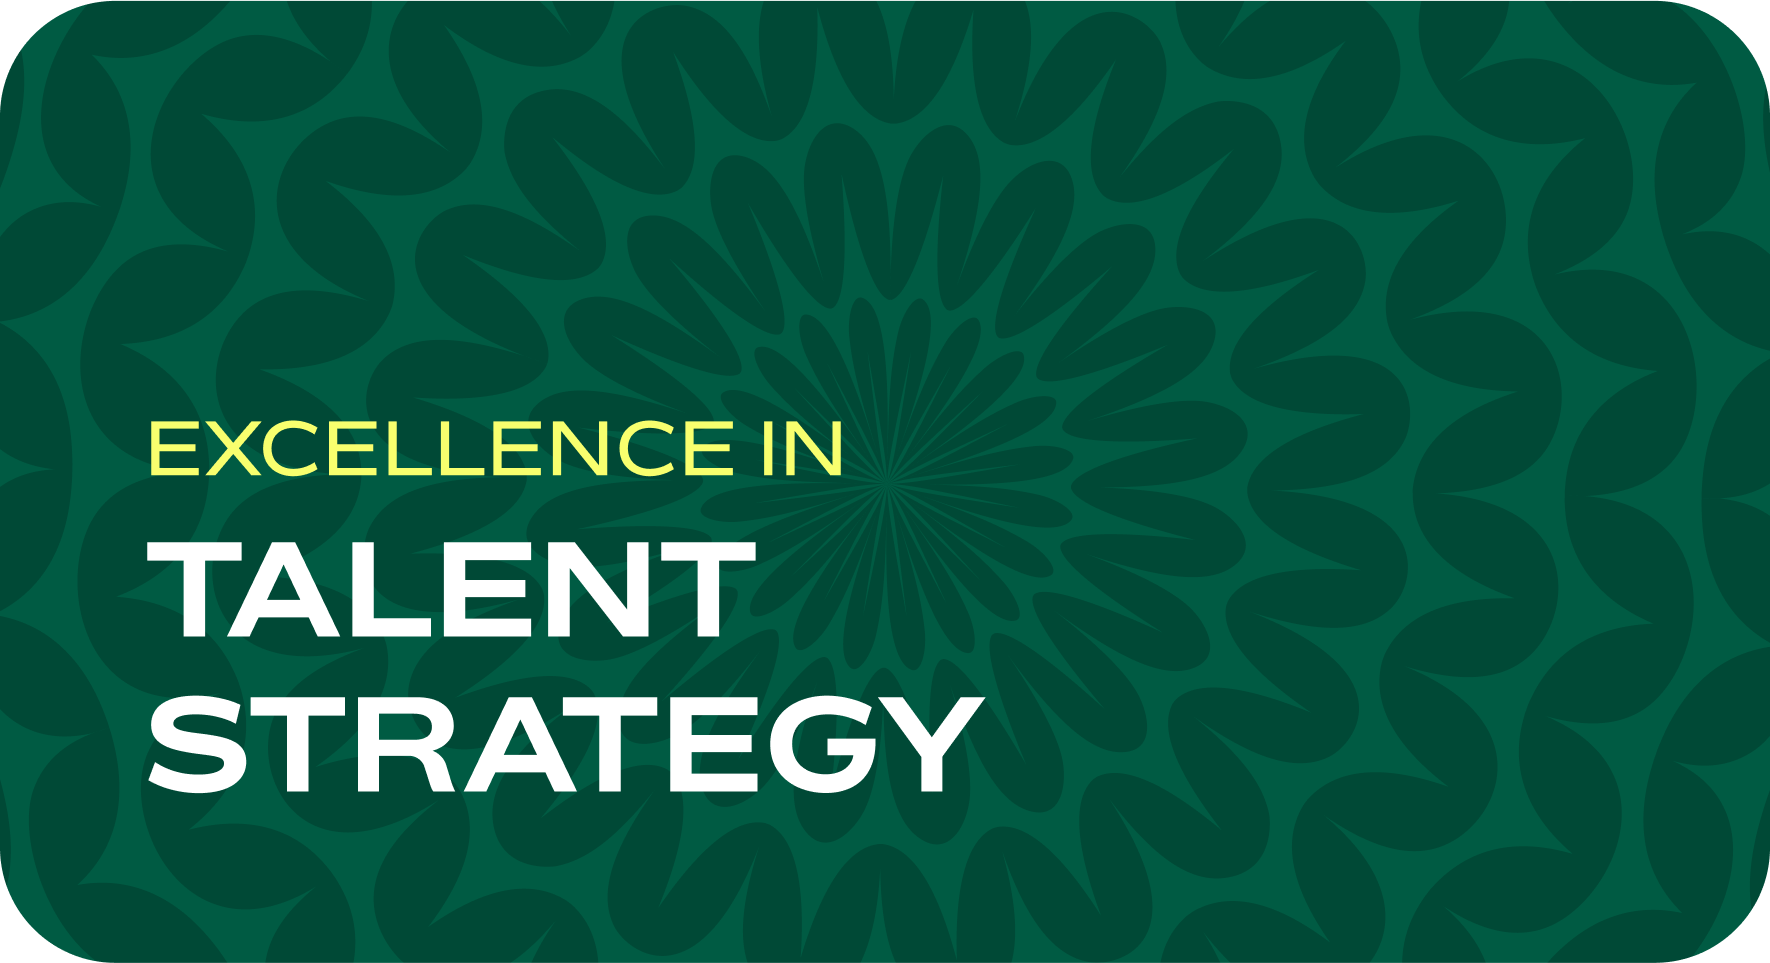 Excellence in talent strategy.